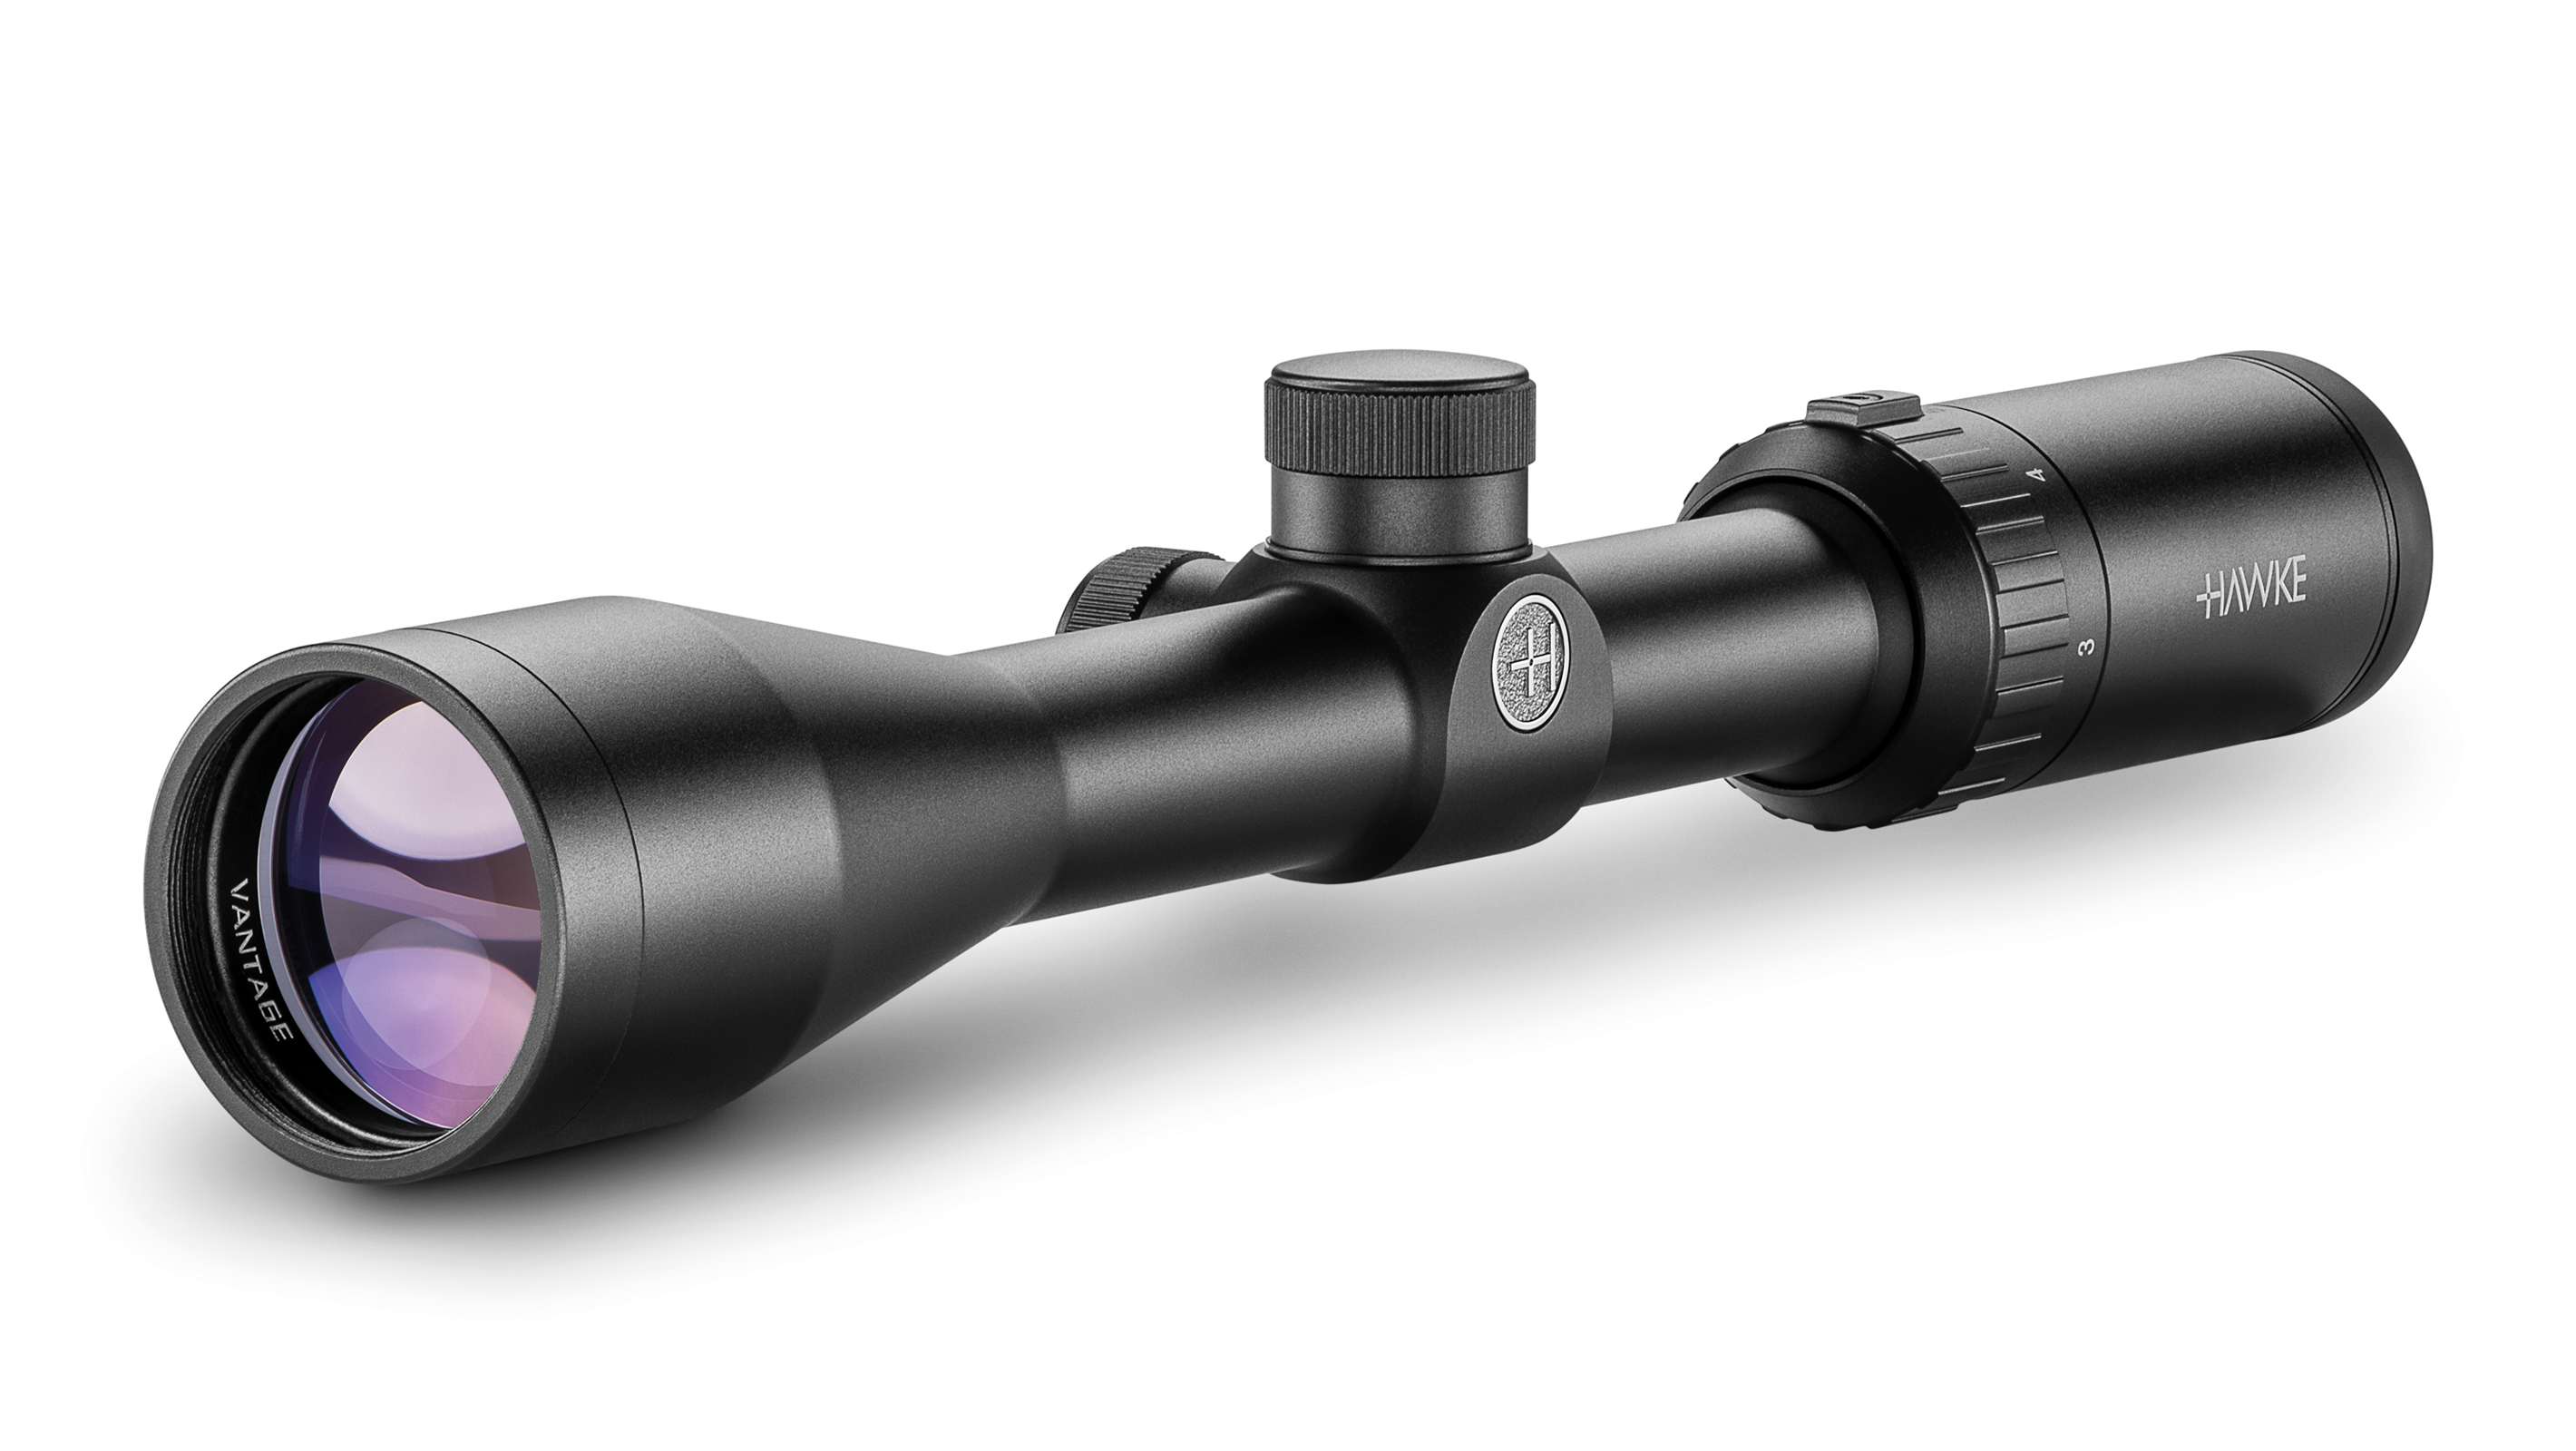 Objective End View Of The Hawke Vantage 3-9x40 30/30 Duplex Rifle Scope